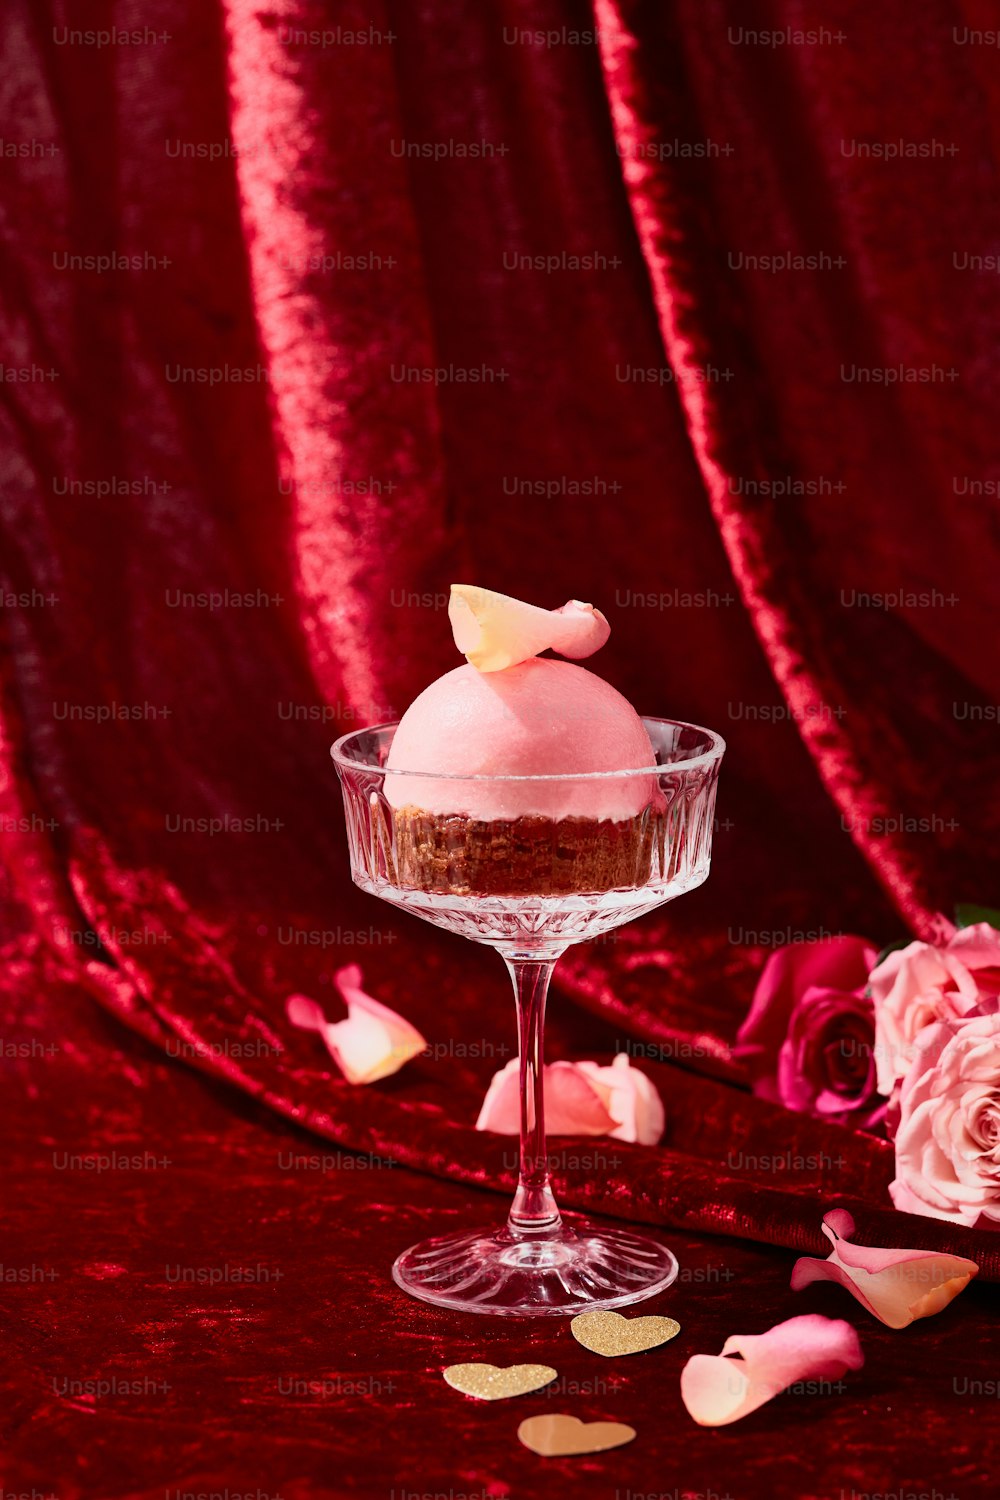 a dessert in a glass dish on a table